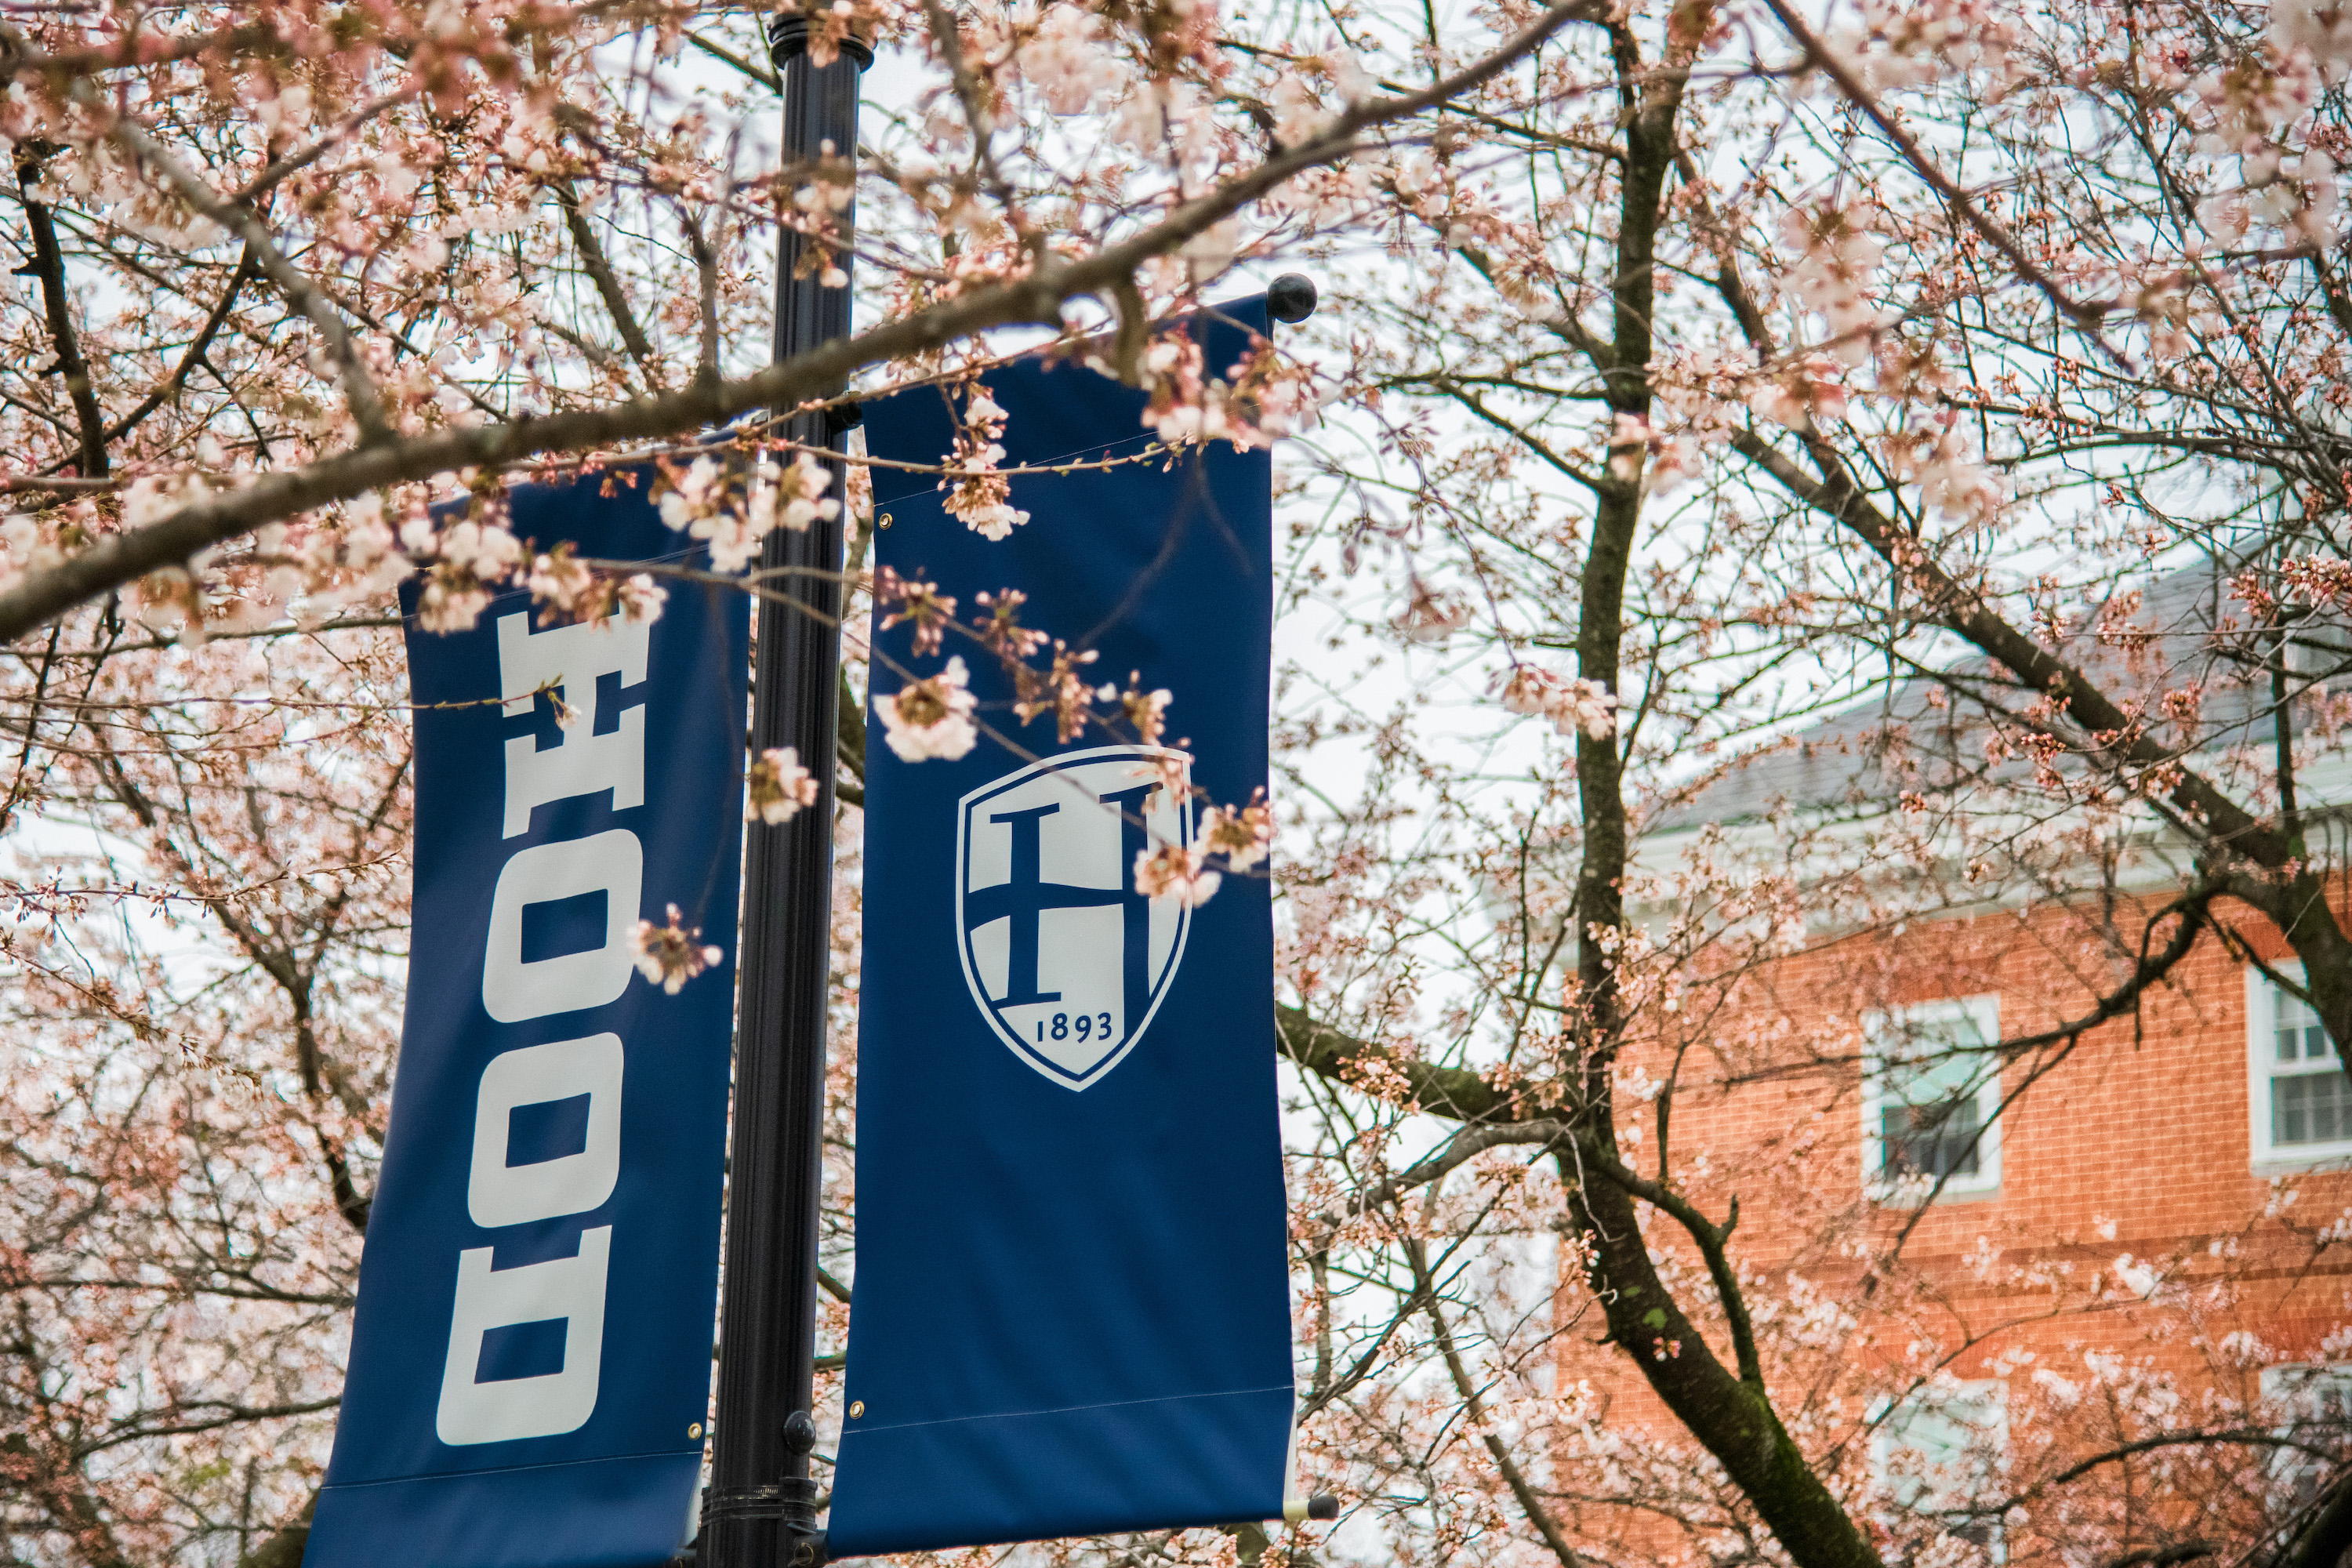 A dark blue Hood banner is surrounded by pink blooms on tree branches